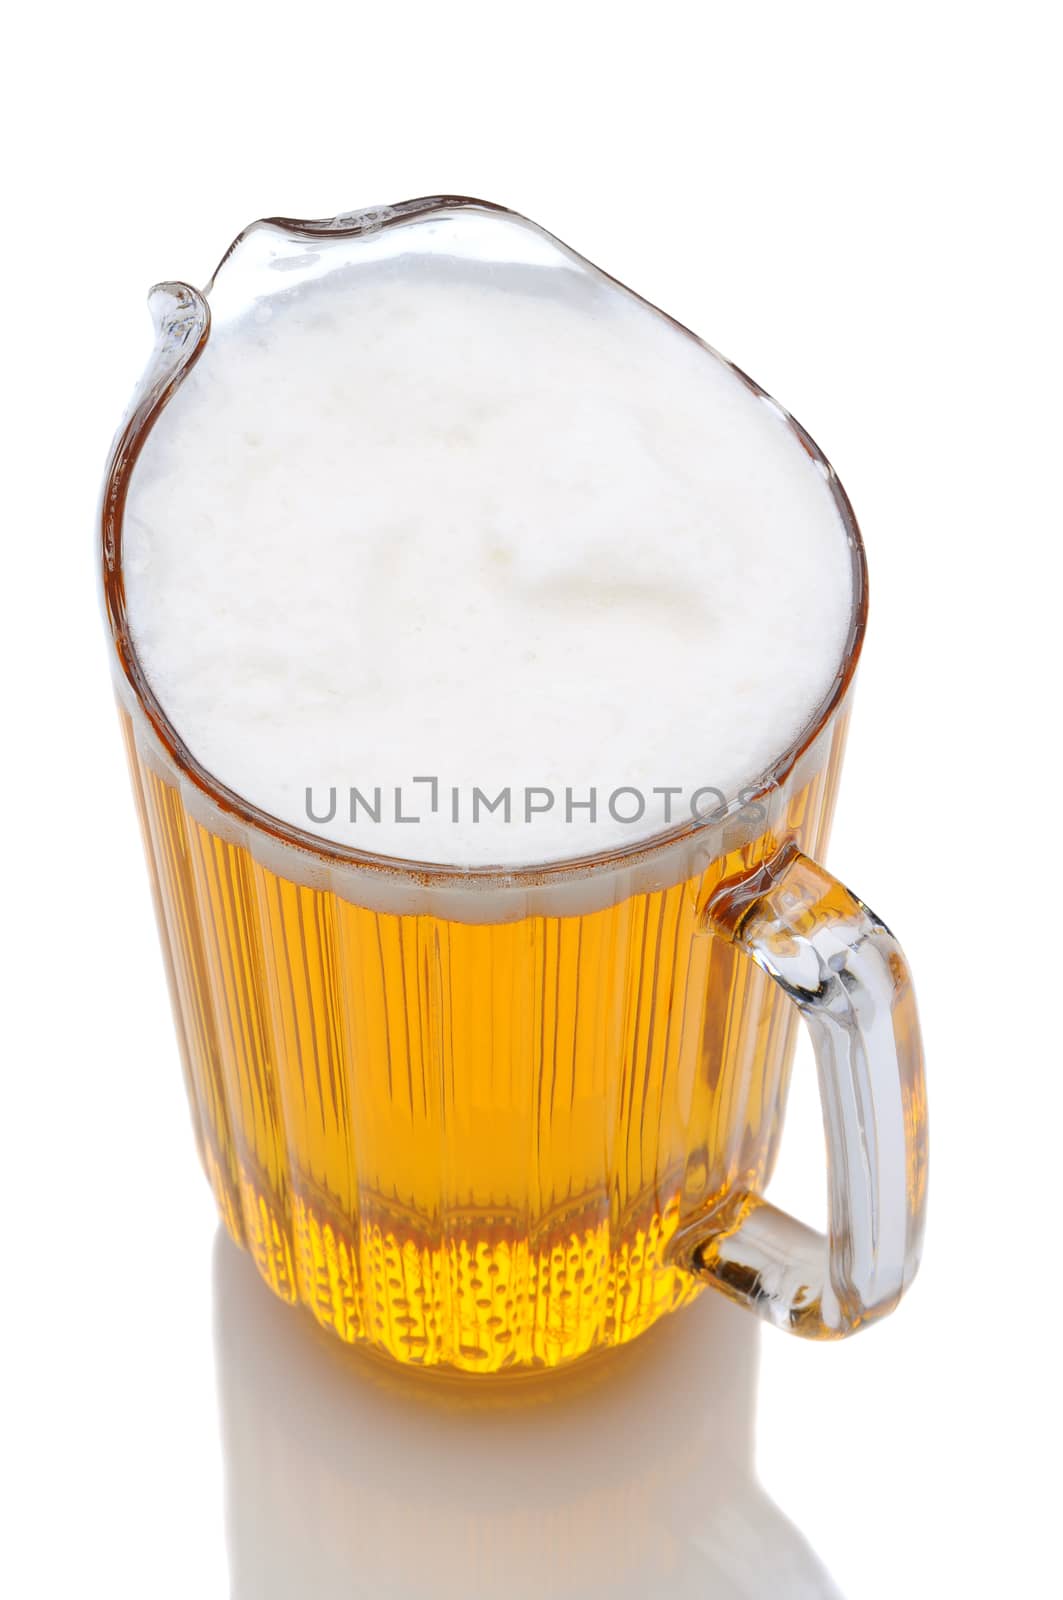 A pitcher of beer shot from a high angle over a white background with reflection.